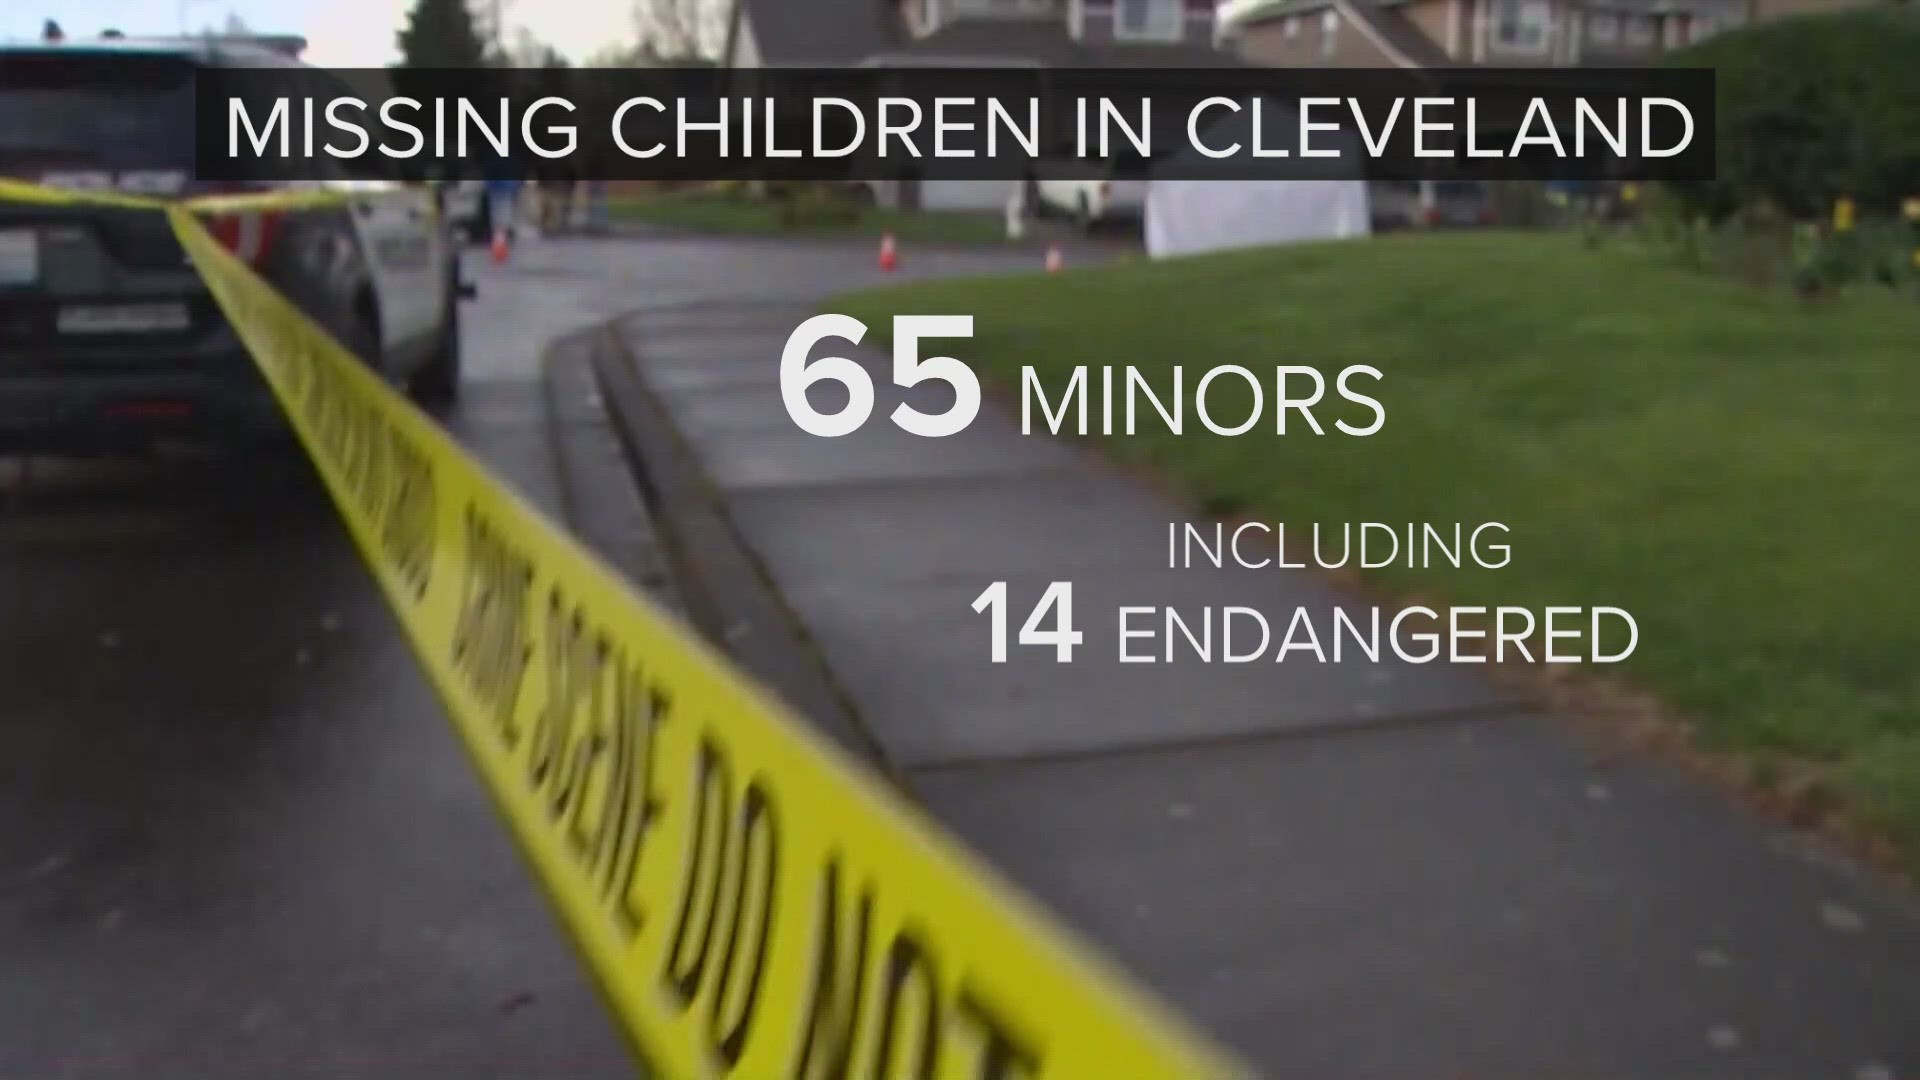 According to Chief Wayne Drummond, out of 1,072 children reported missing this year, 1,020 were safely returned.